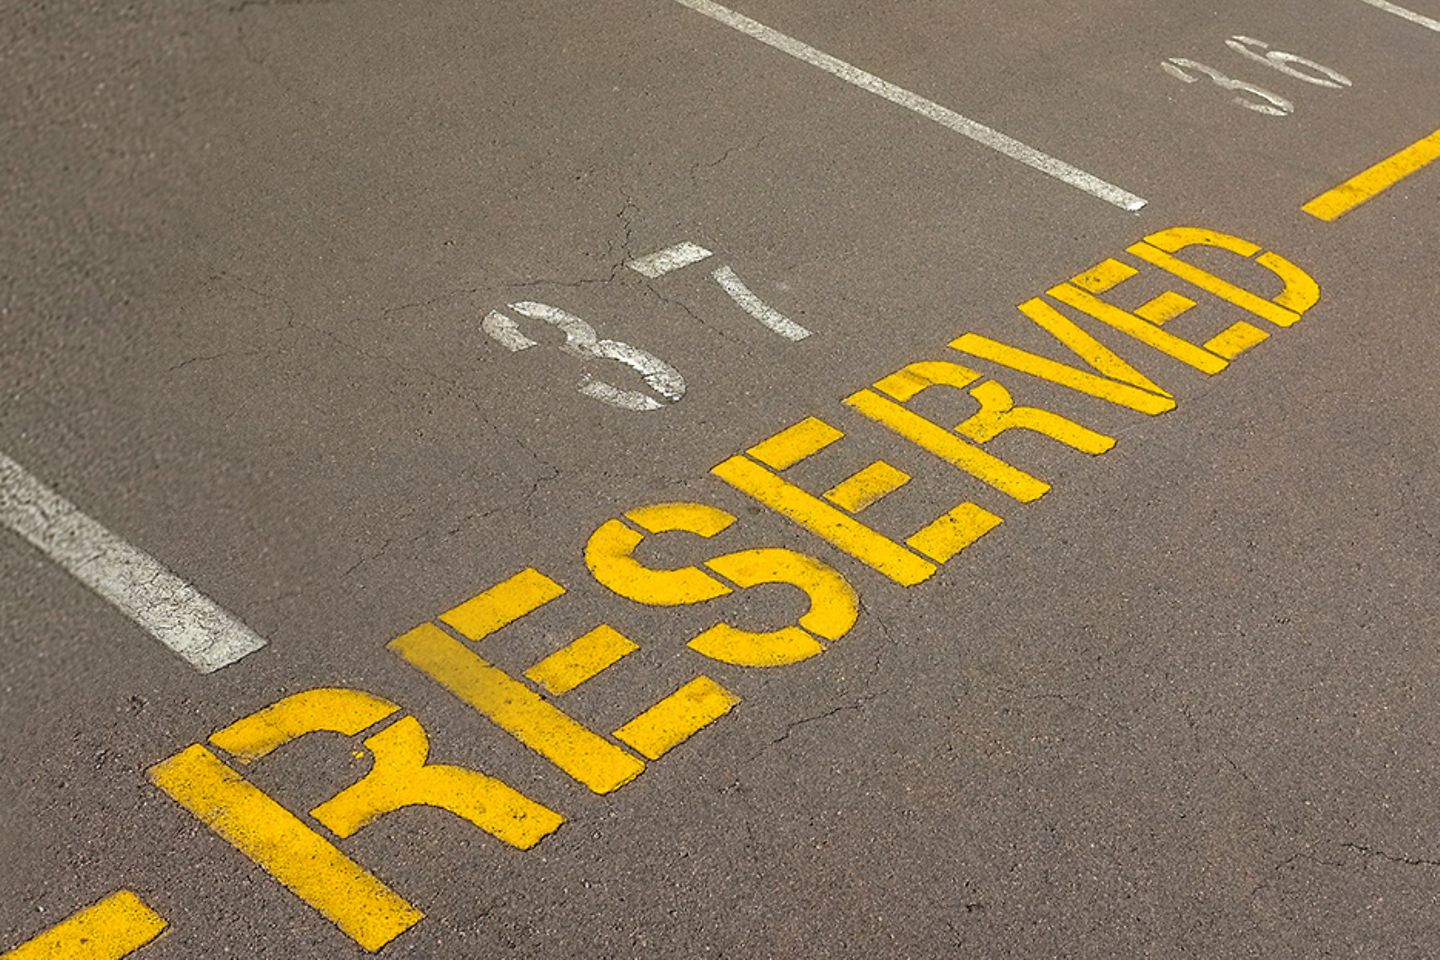 Photo of empty parking spaces, one with the inscription "reserved".